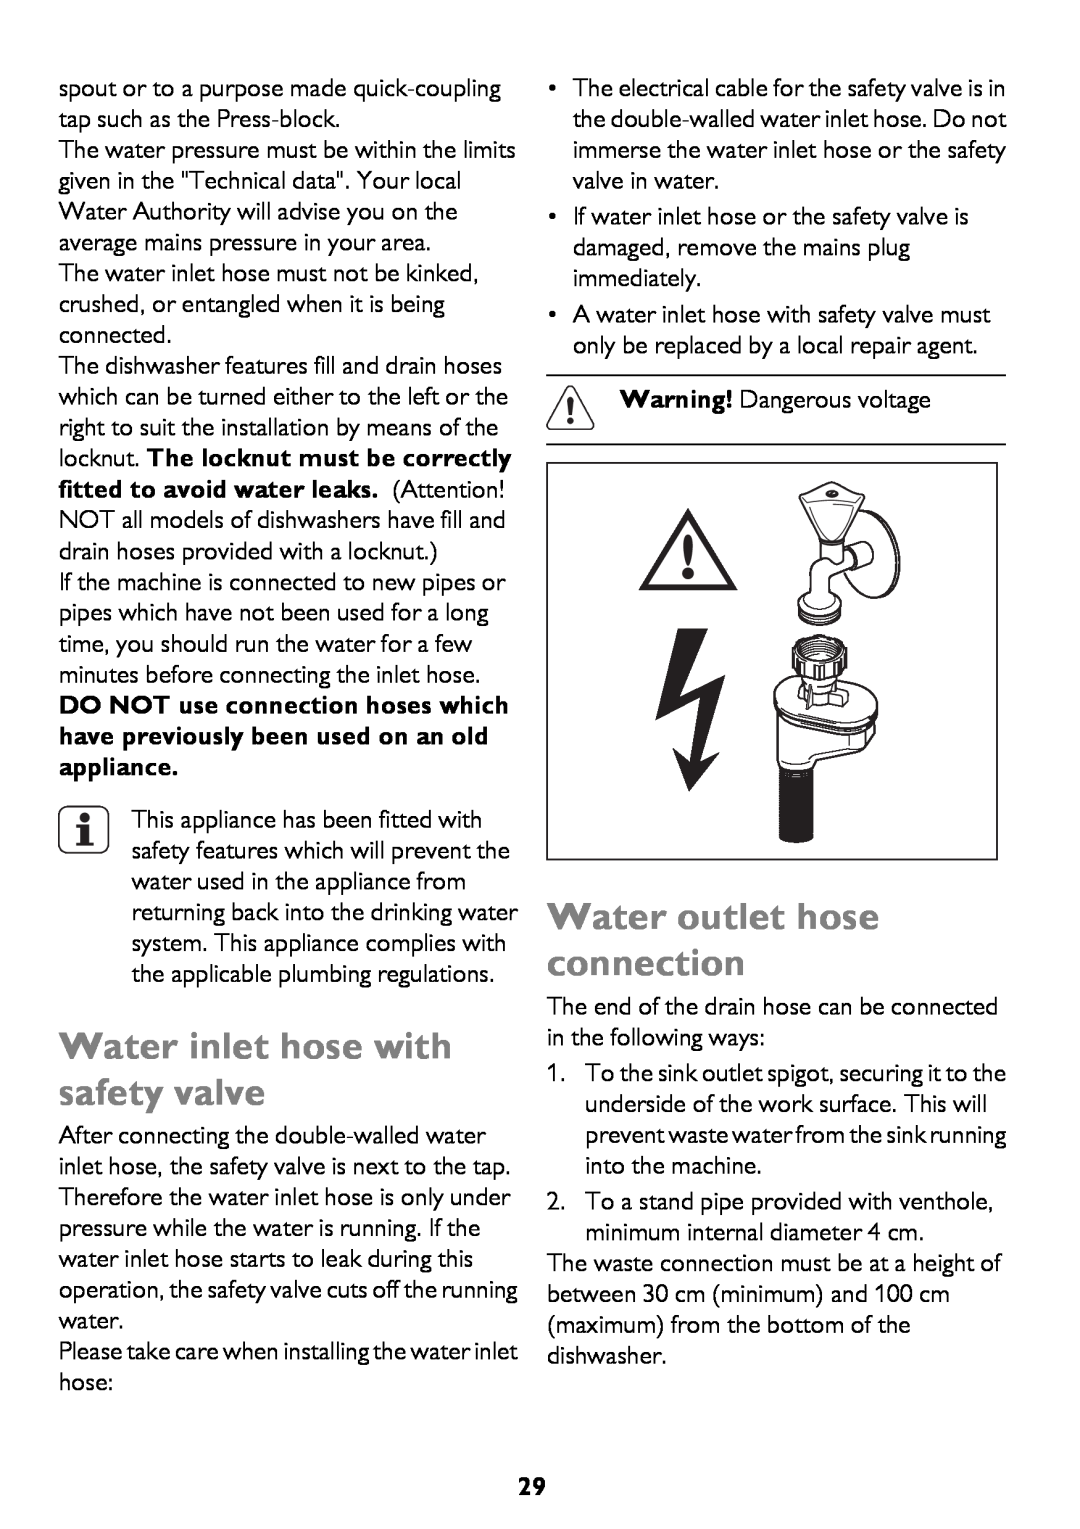 John Lewis JLDWW 1206 instruction manual Water inlet hose with safety valve, Water outlet hose connection 